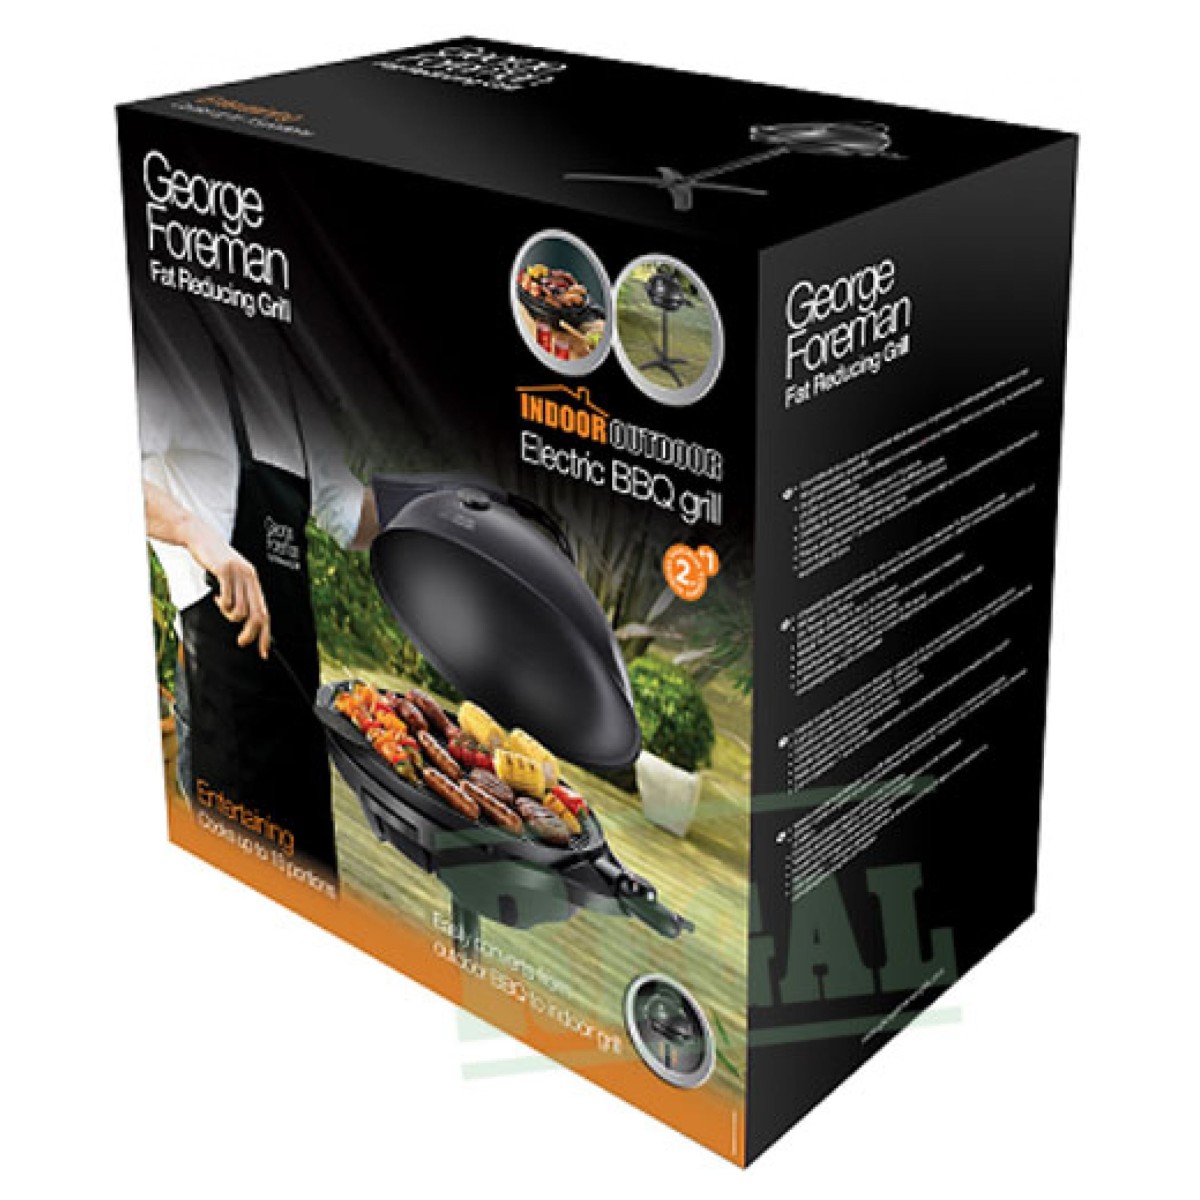 Russell Hobbs & George Foreman Universal Grill (22460-56) → REGAL